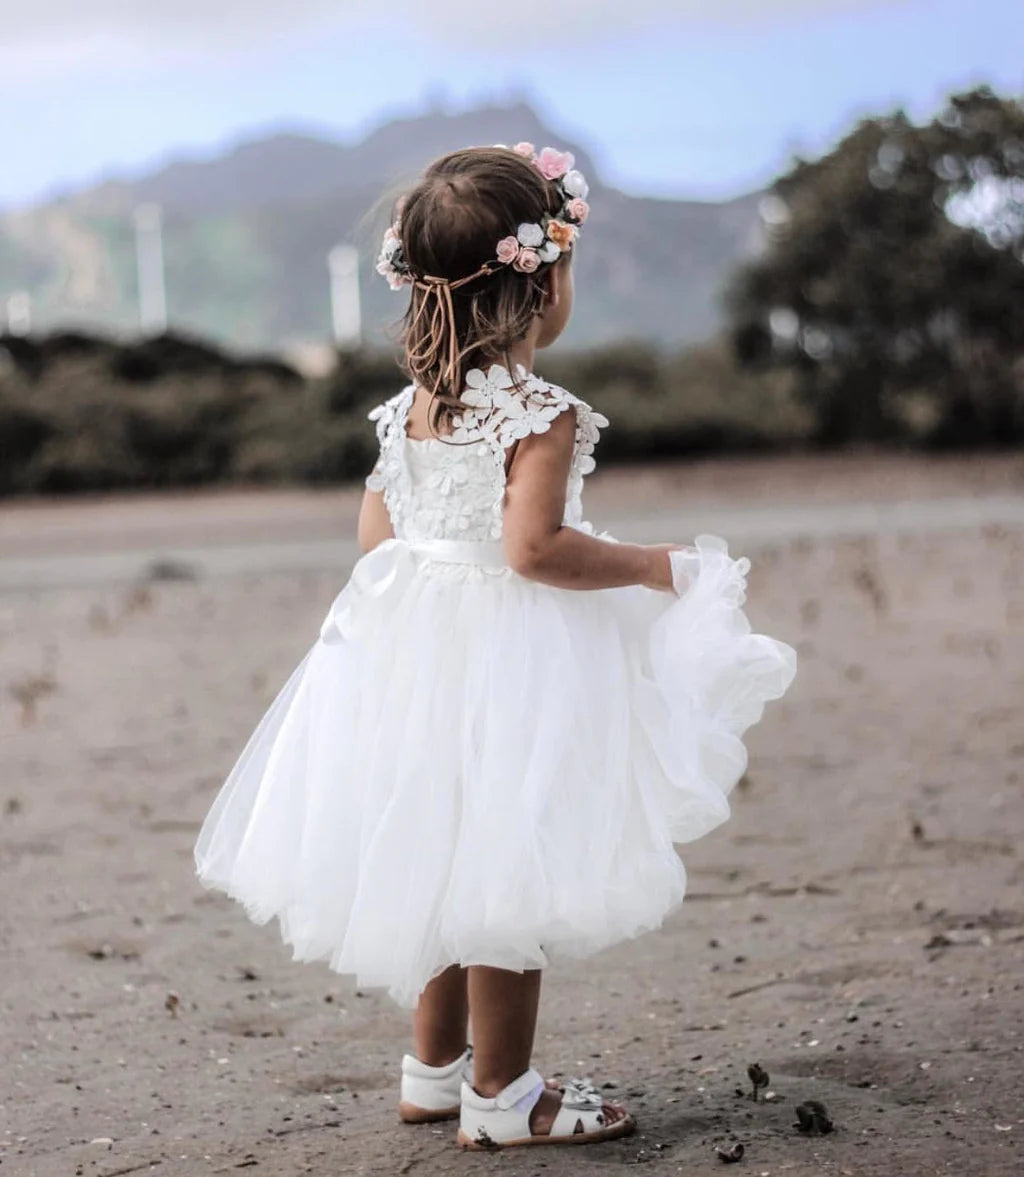 Buy Stylish Party Dresses For Girls Starting At Just Rs. 279